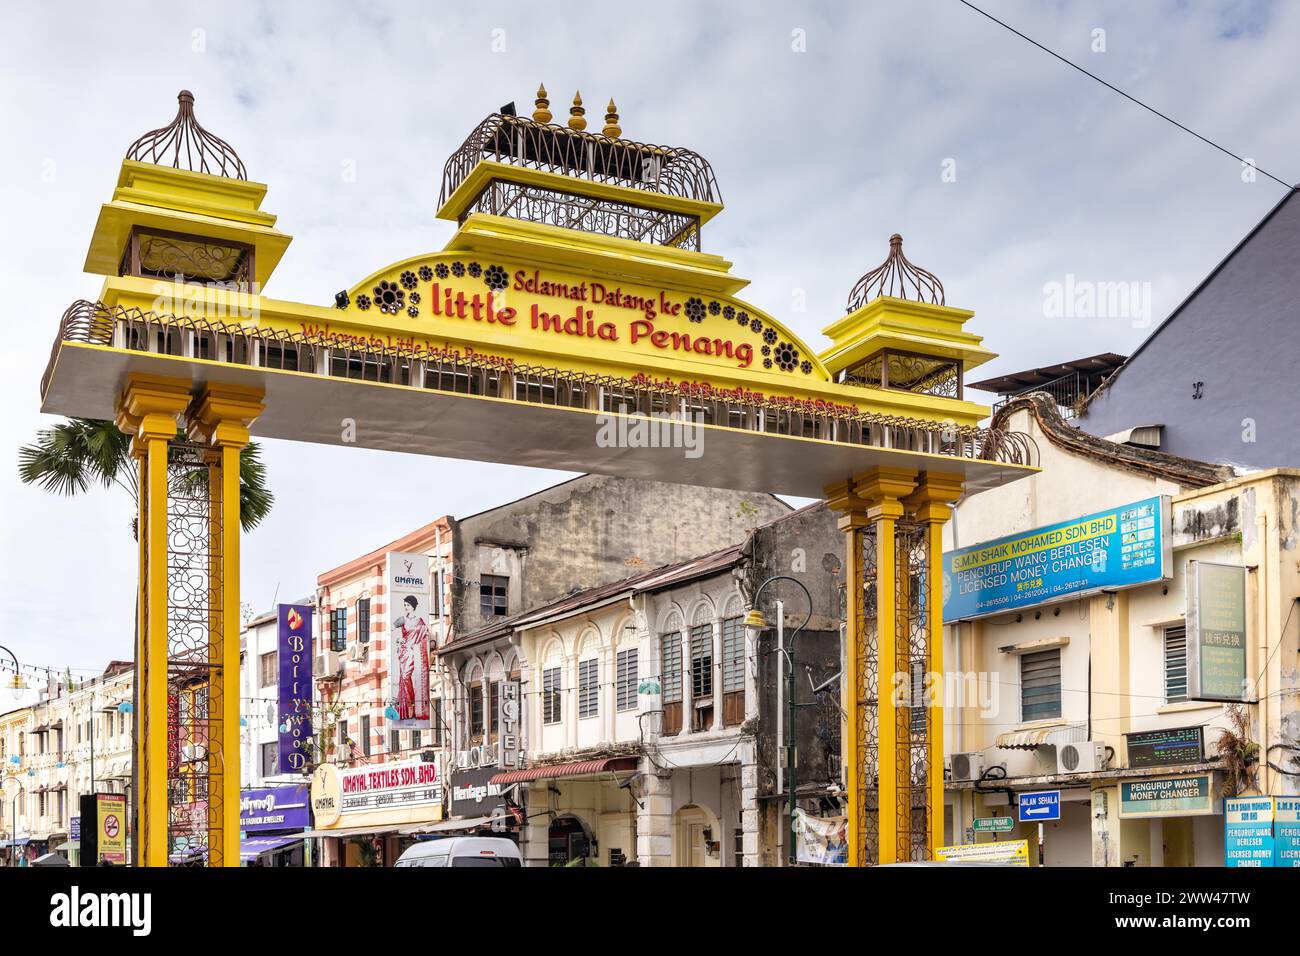 The Little India district is located in the heart of Georgetown, the capital of Penang, Malaysia Stock Photo